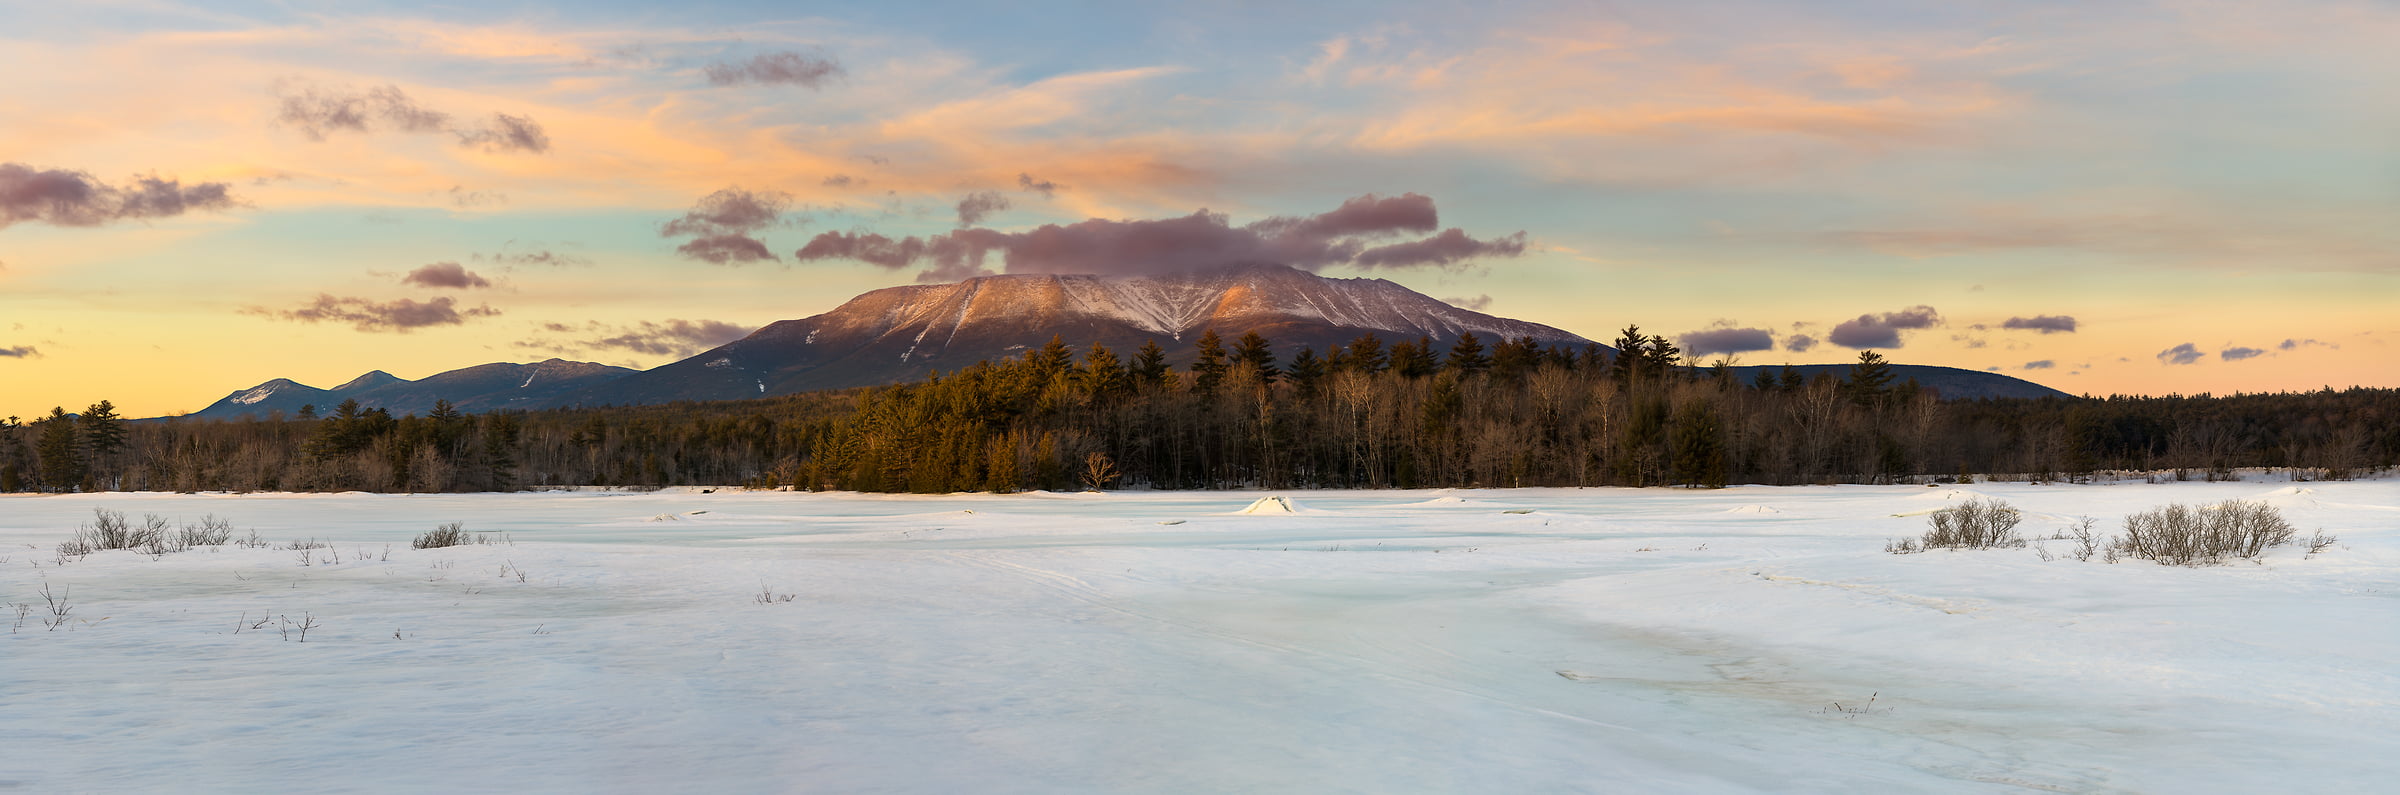 1,310 megapixels! A very high resolution, large-format panorama photo of Mt. Katahdin at sunset during winter; fine art landscape photograph created by Aaron Priest at River Pond, Millinocket, Maine